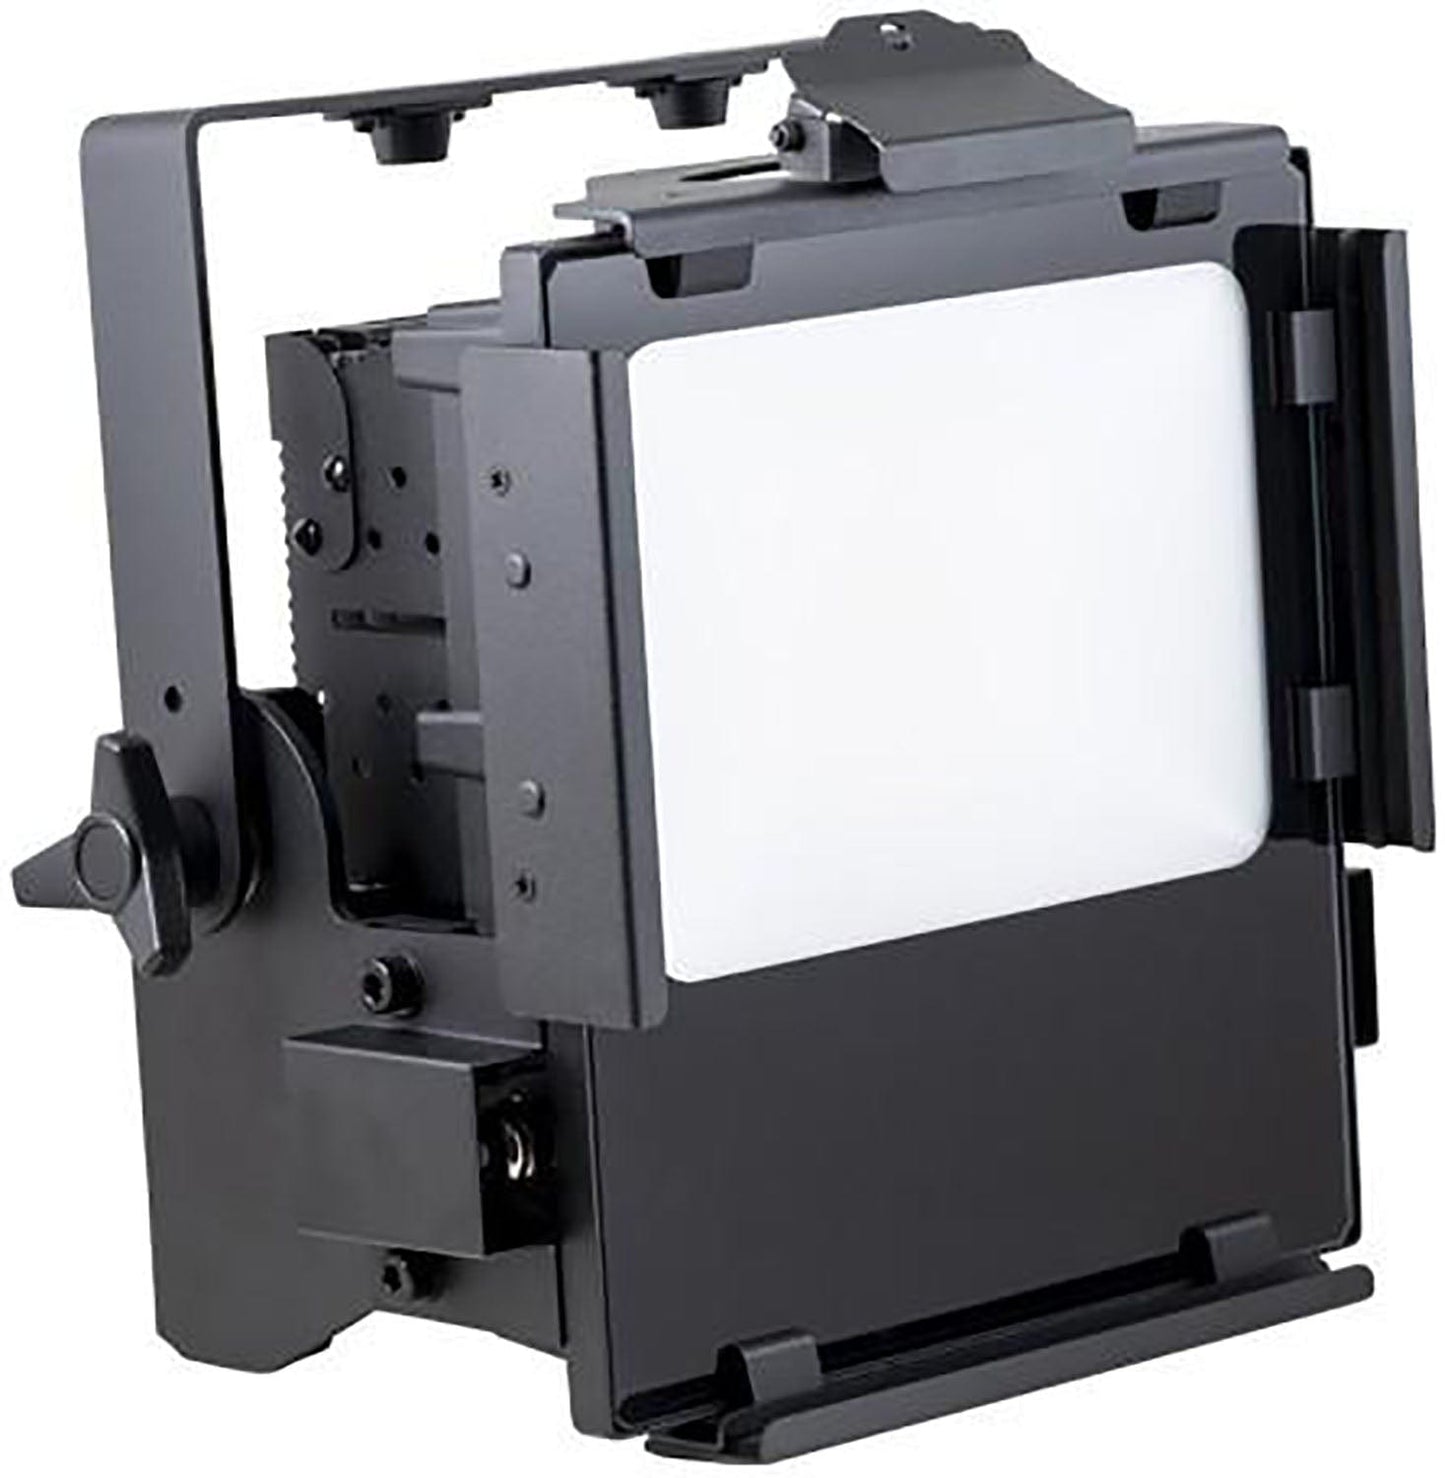 GLP MBL 20 Variable White LED Panel Light 2700K to 6500K, With 27 Variable White LED's - PSSL ProSound and Stage Lighting